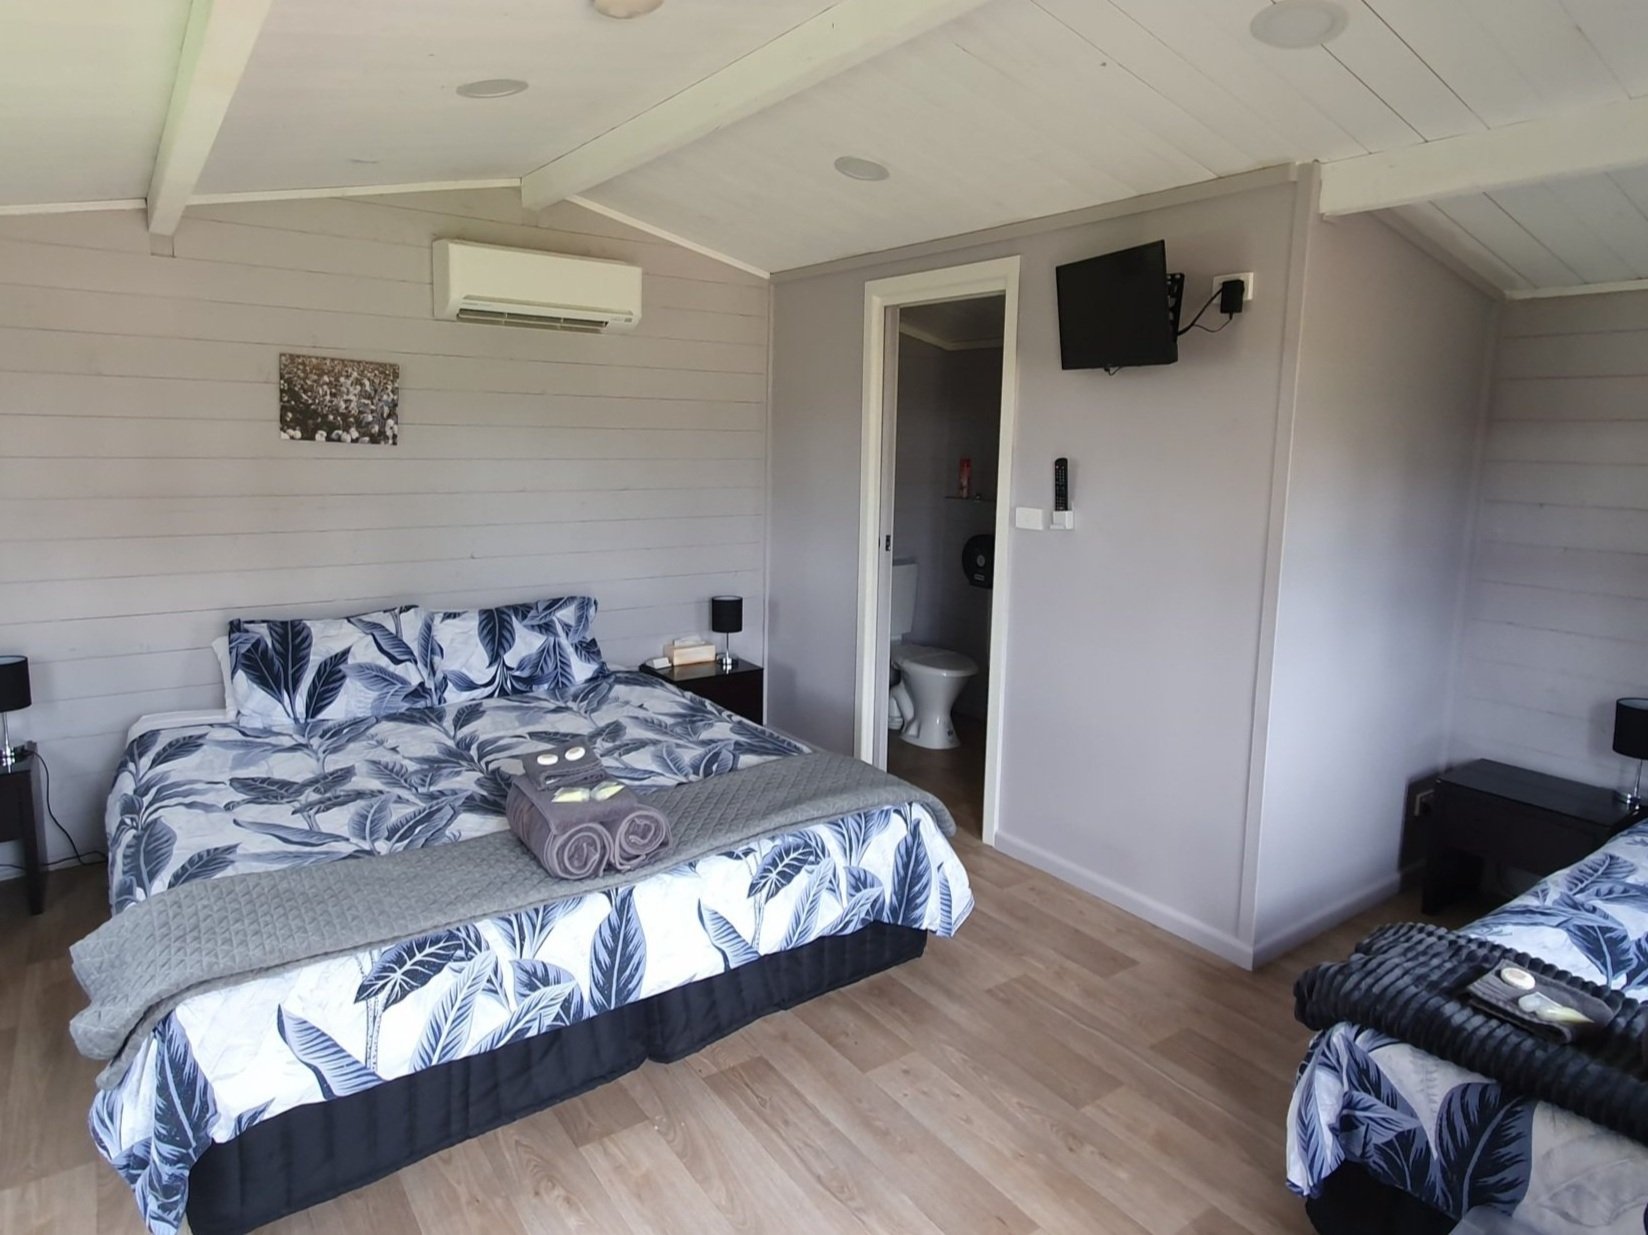 family enquite cabin accommodation NSW